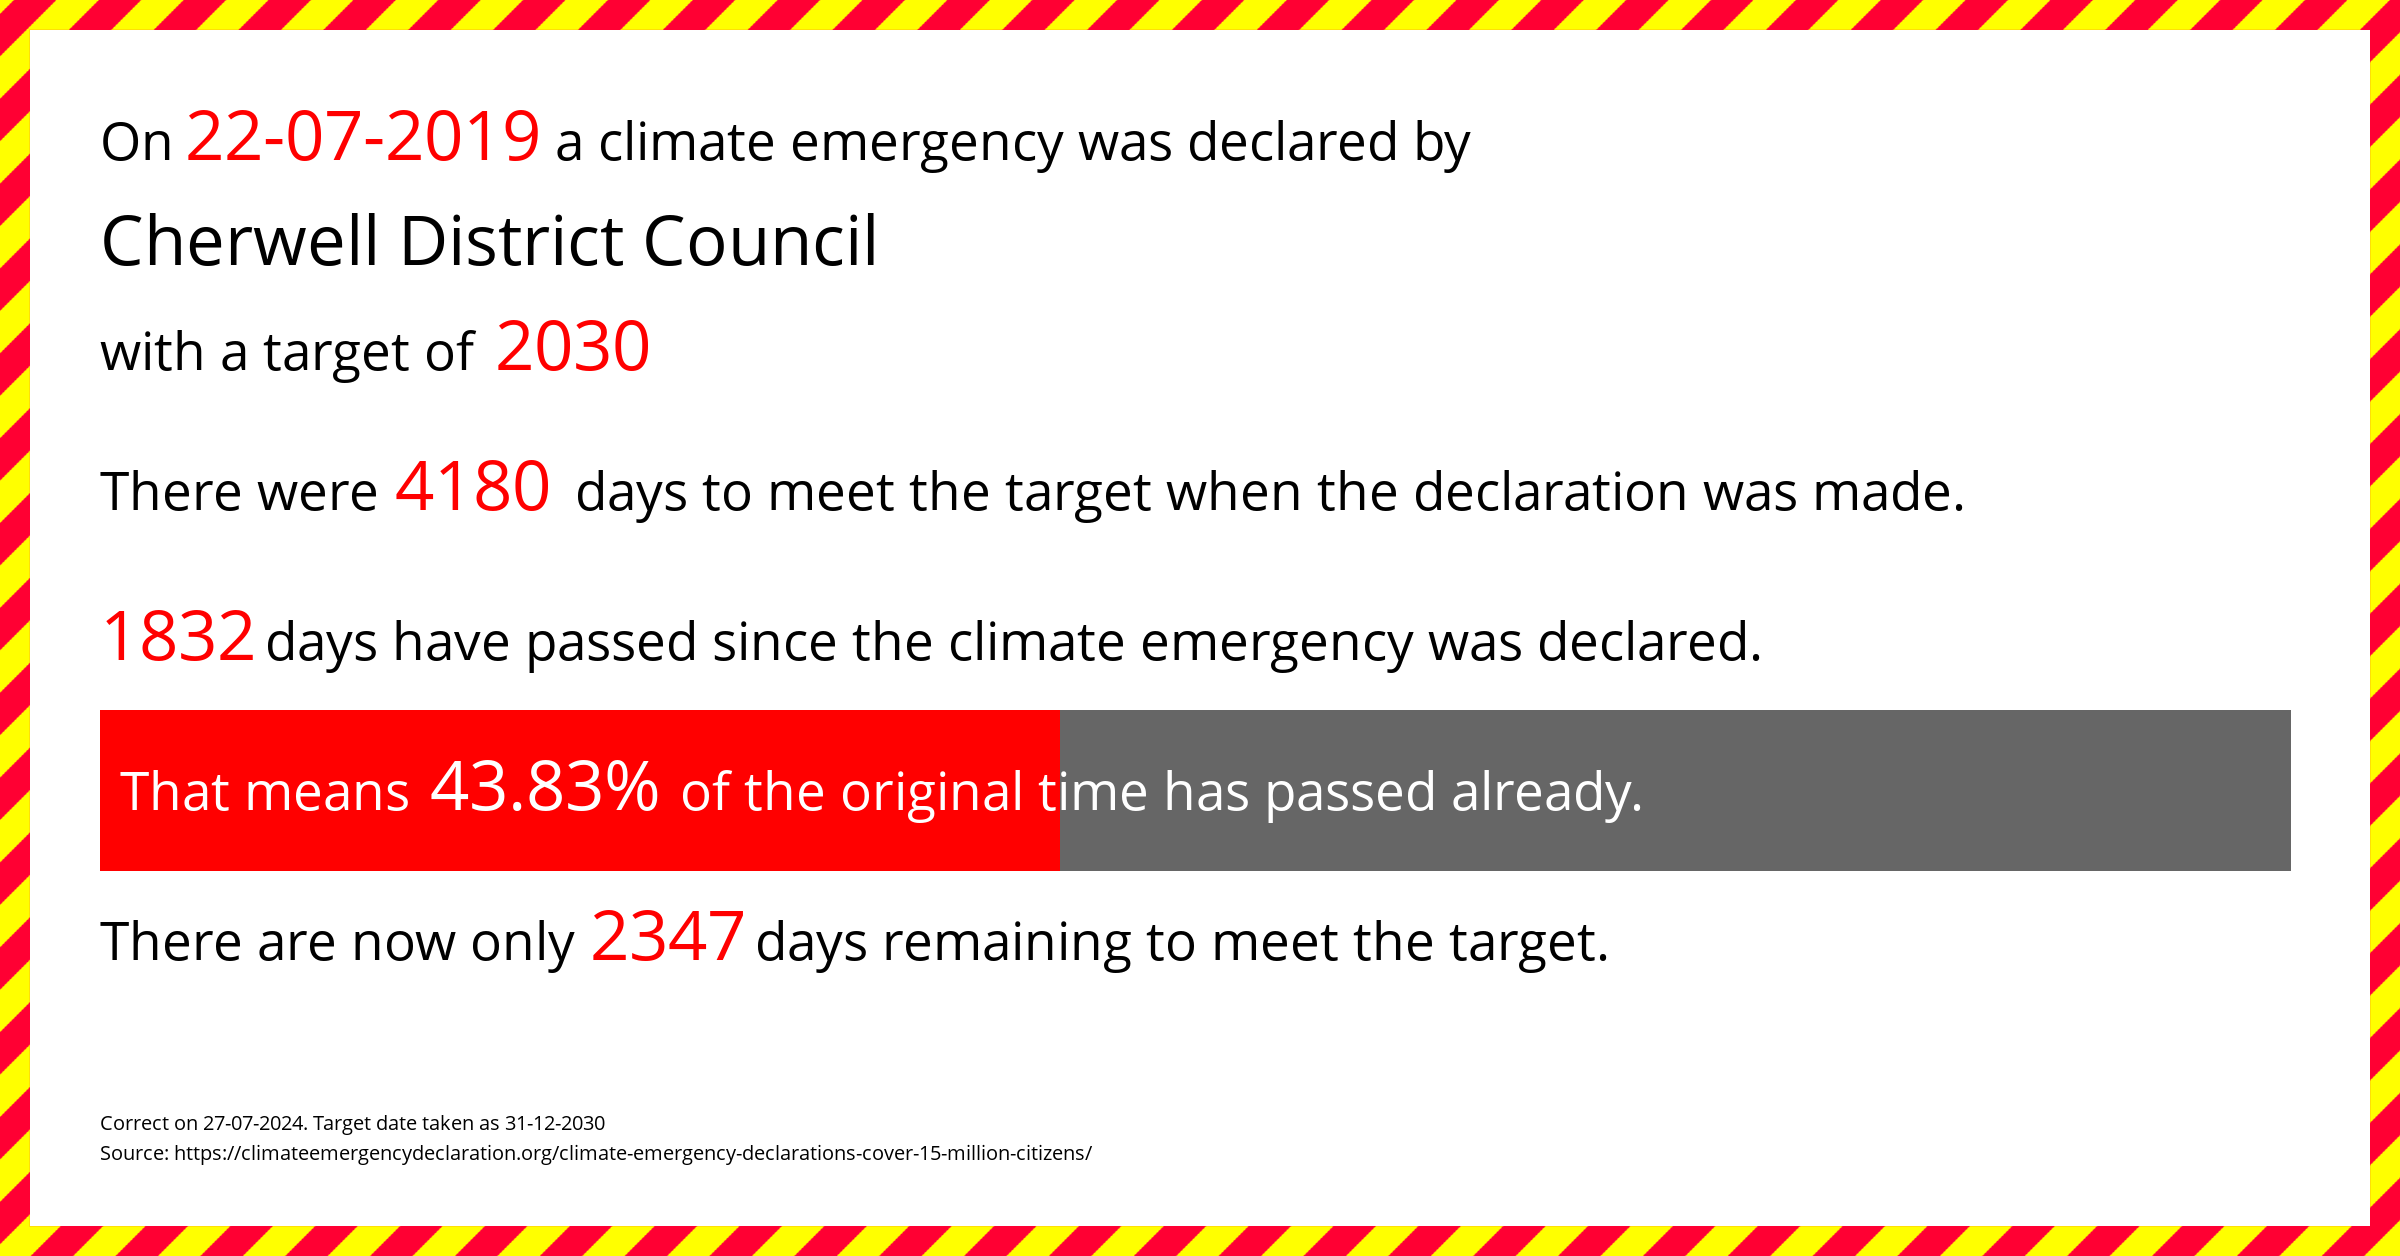 Cherwell District Council declared a Climate emergency on Monday 22nd July 2019, with a target of 2030.